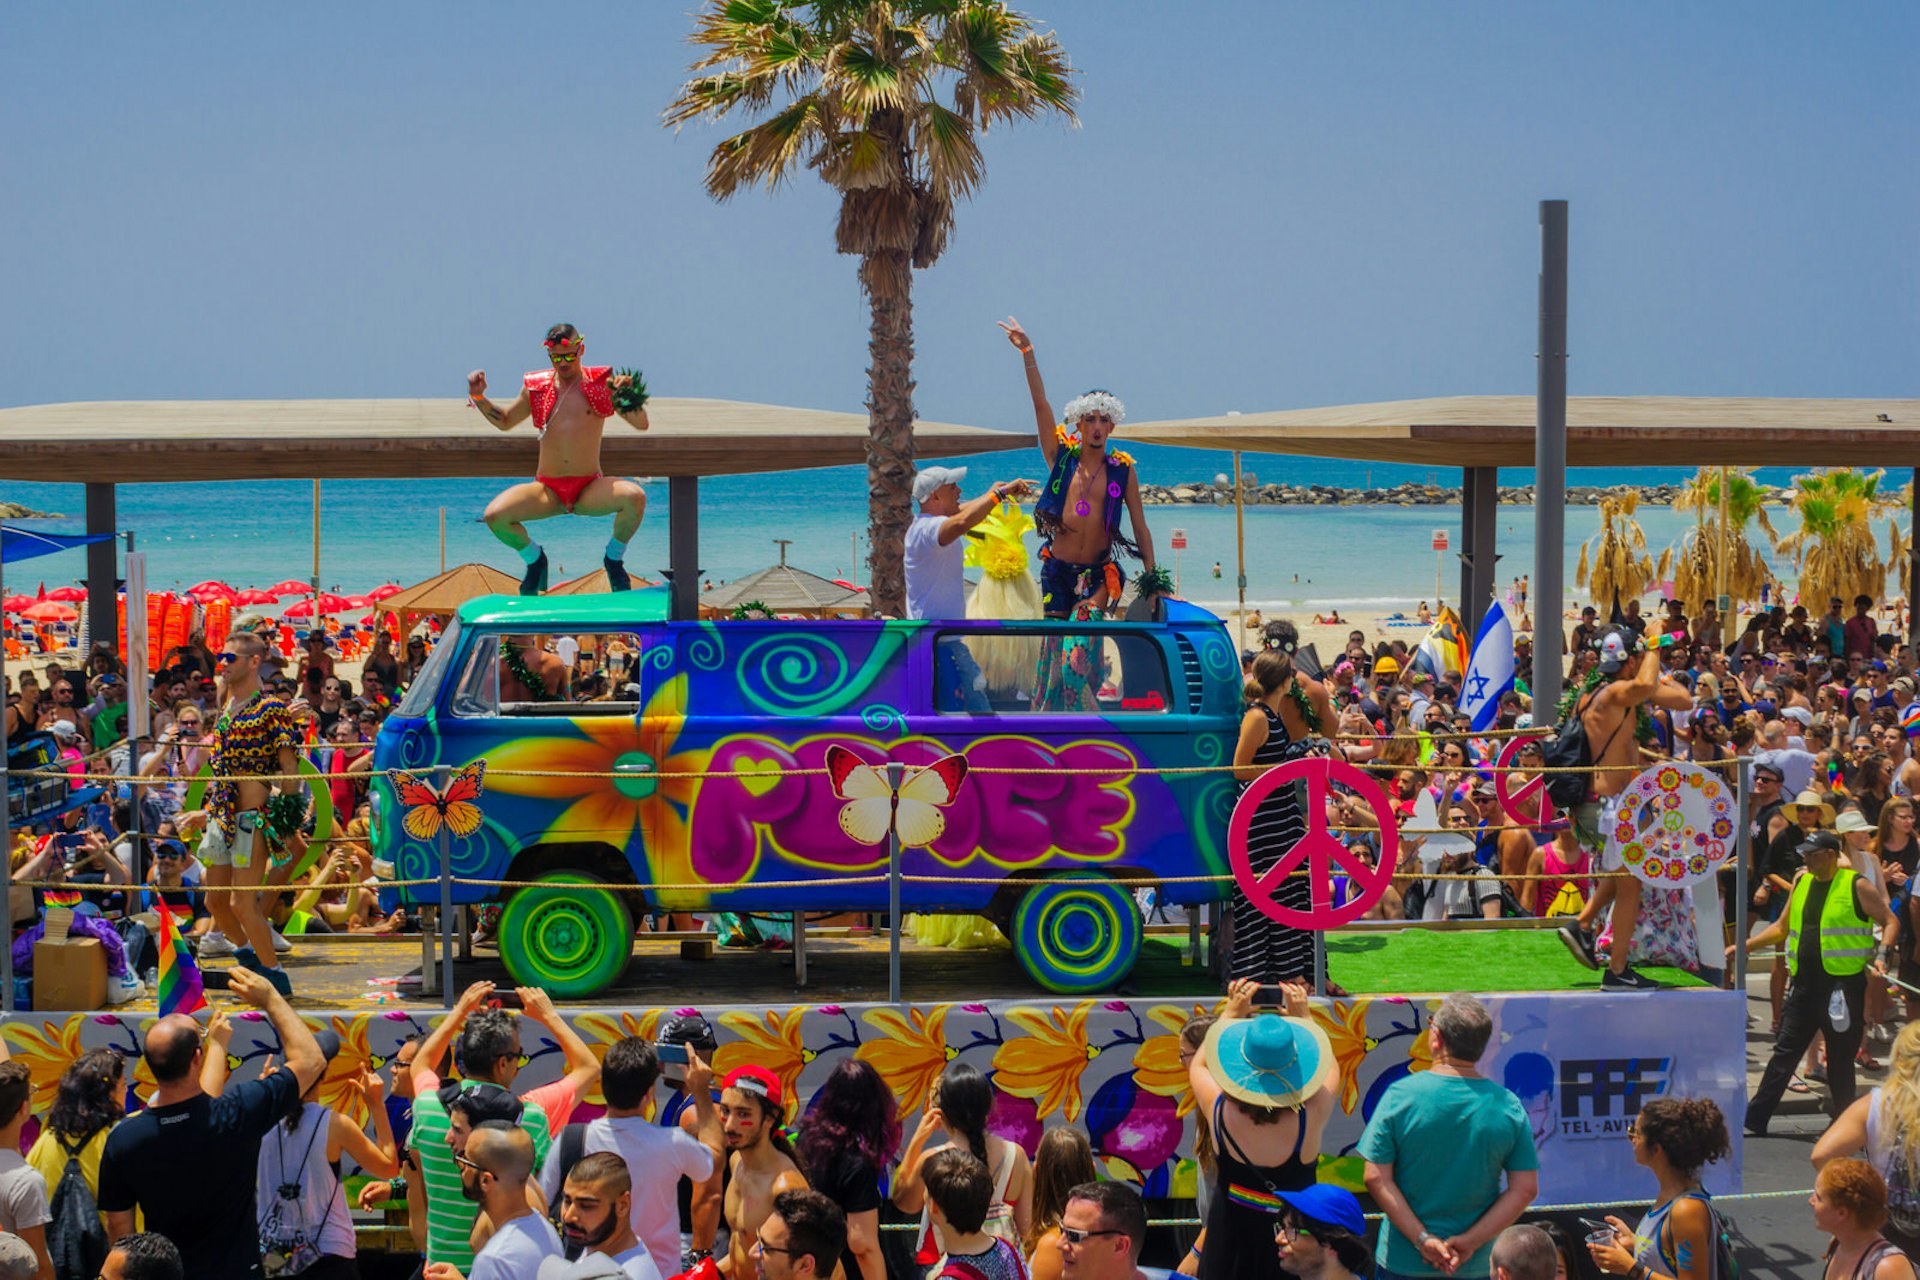 Dancers on a truck entertain the crowd in the Pride parade in the streets of Tel Aviv.